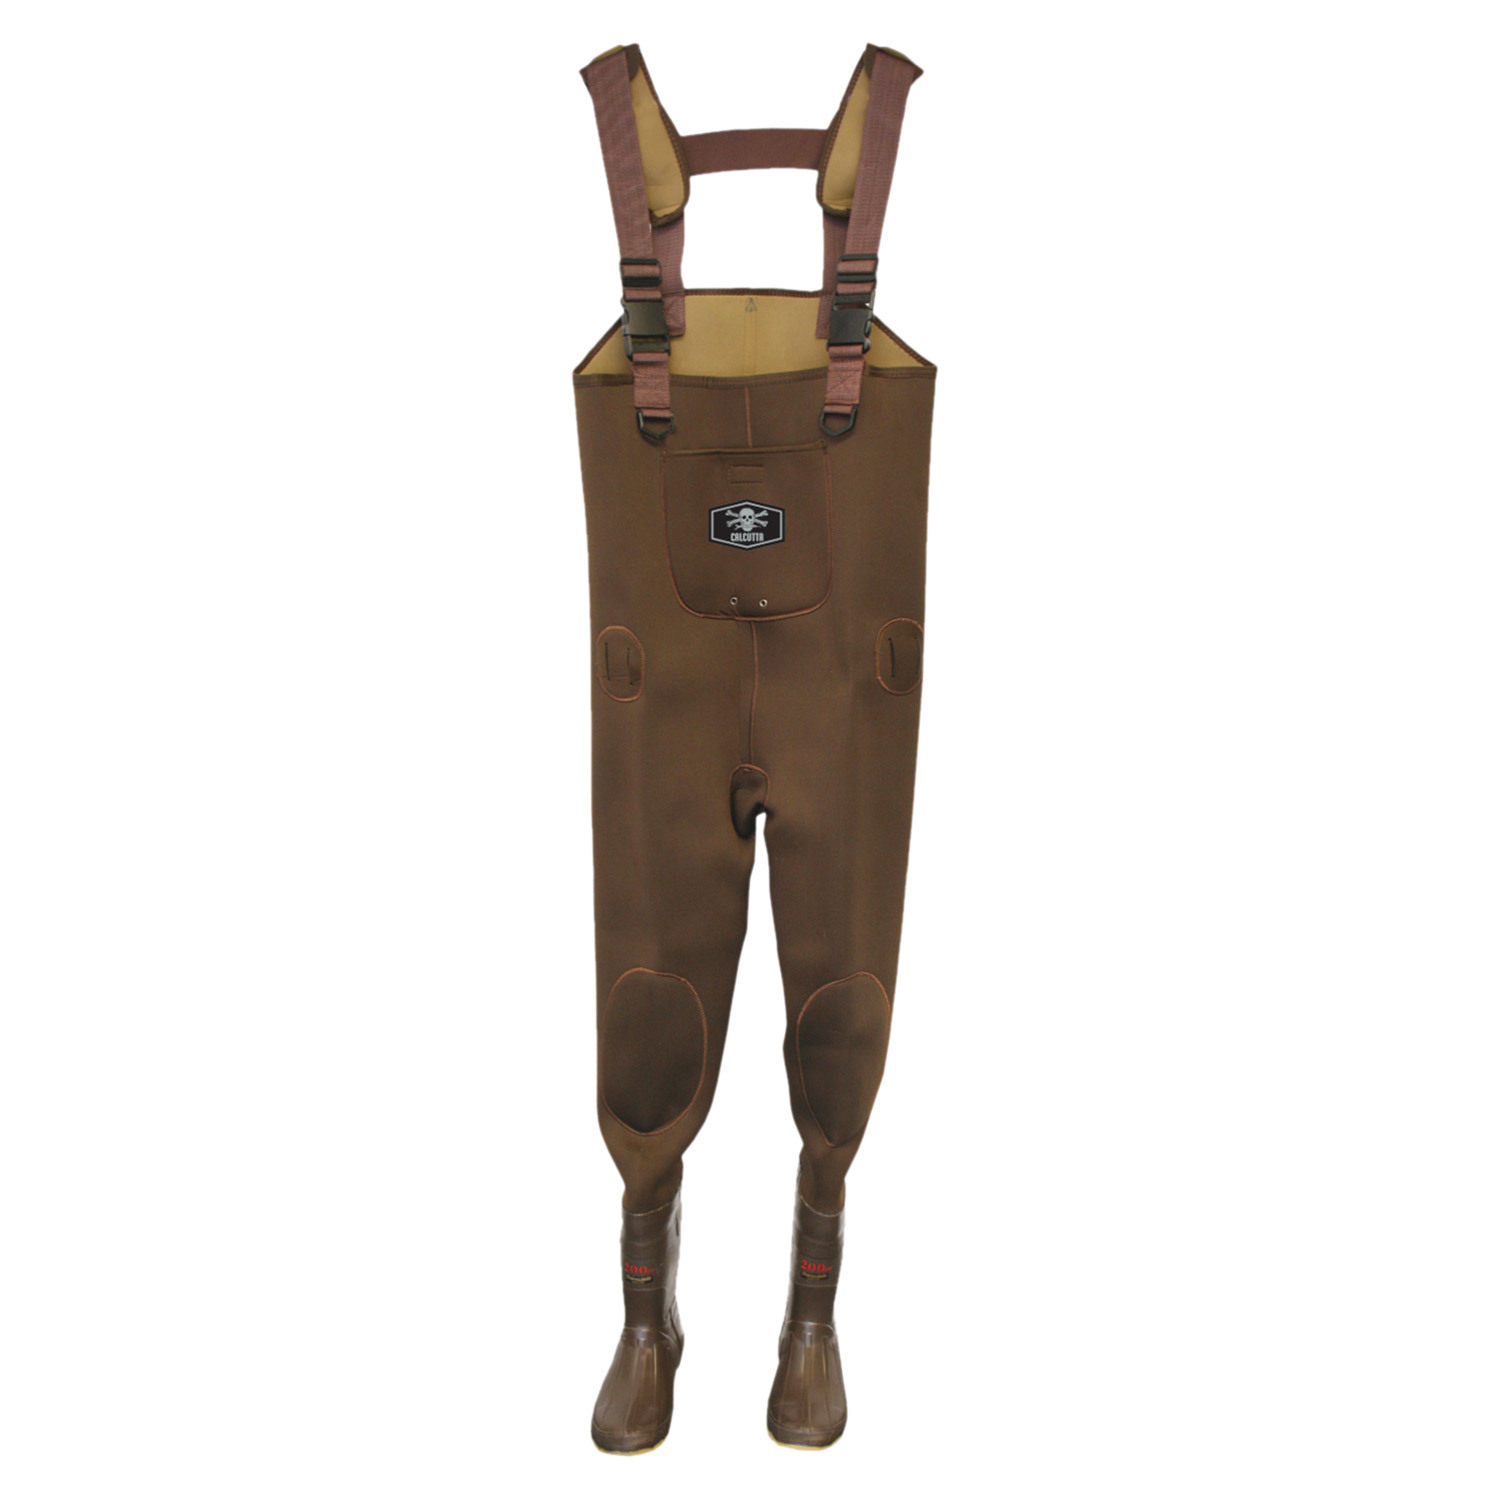 White River Youth Three Forks Lug-Sole Waders - Cabelas - White